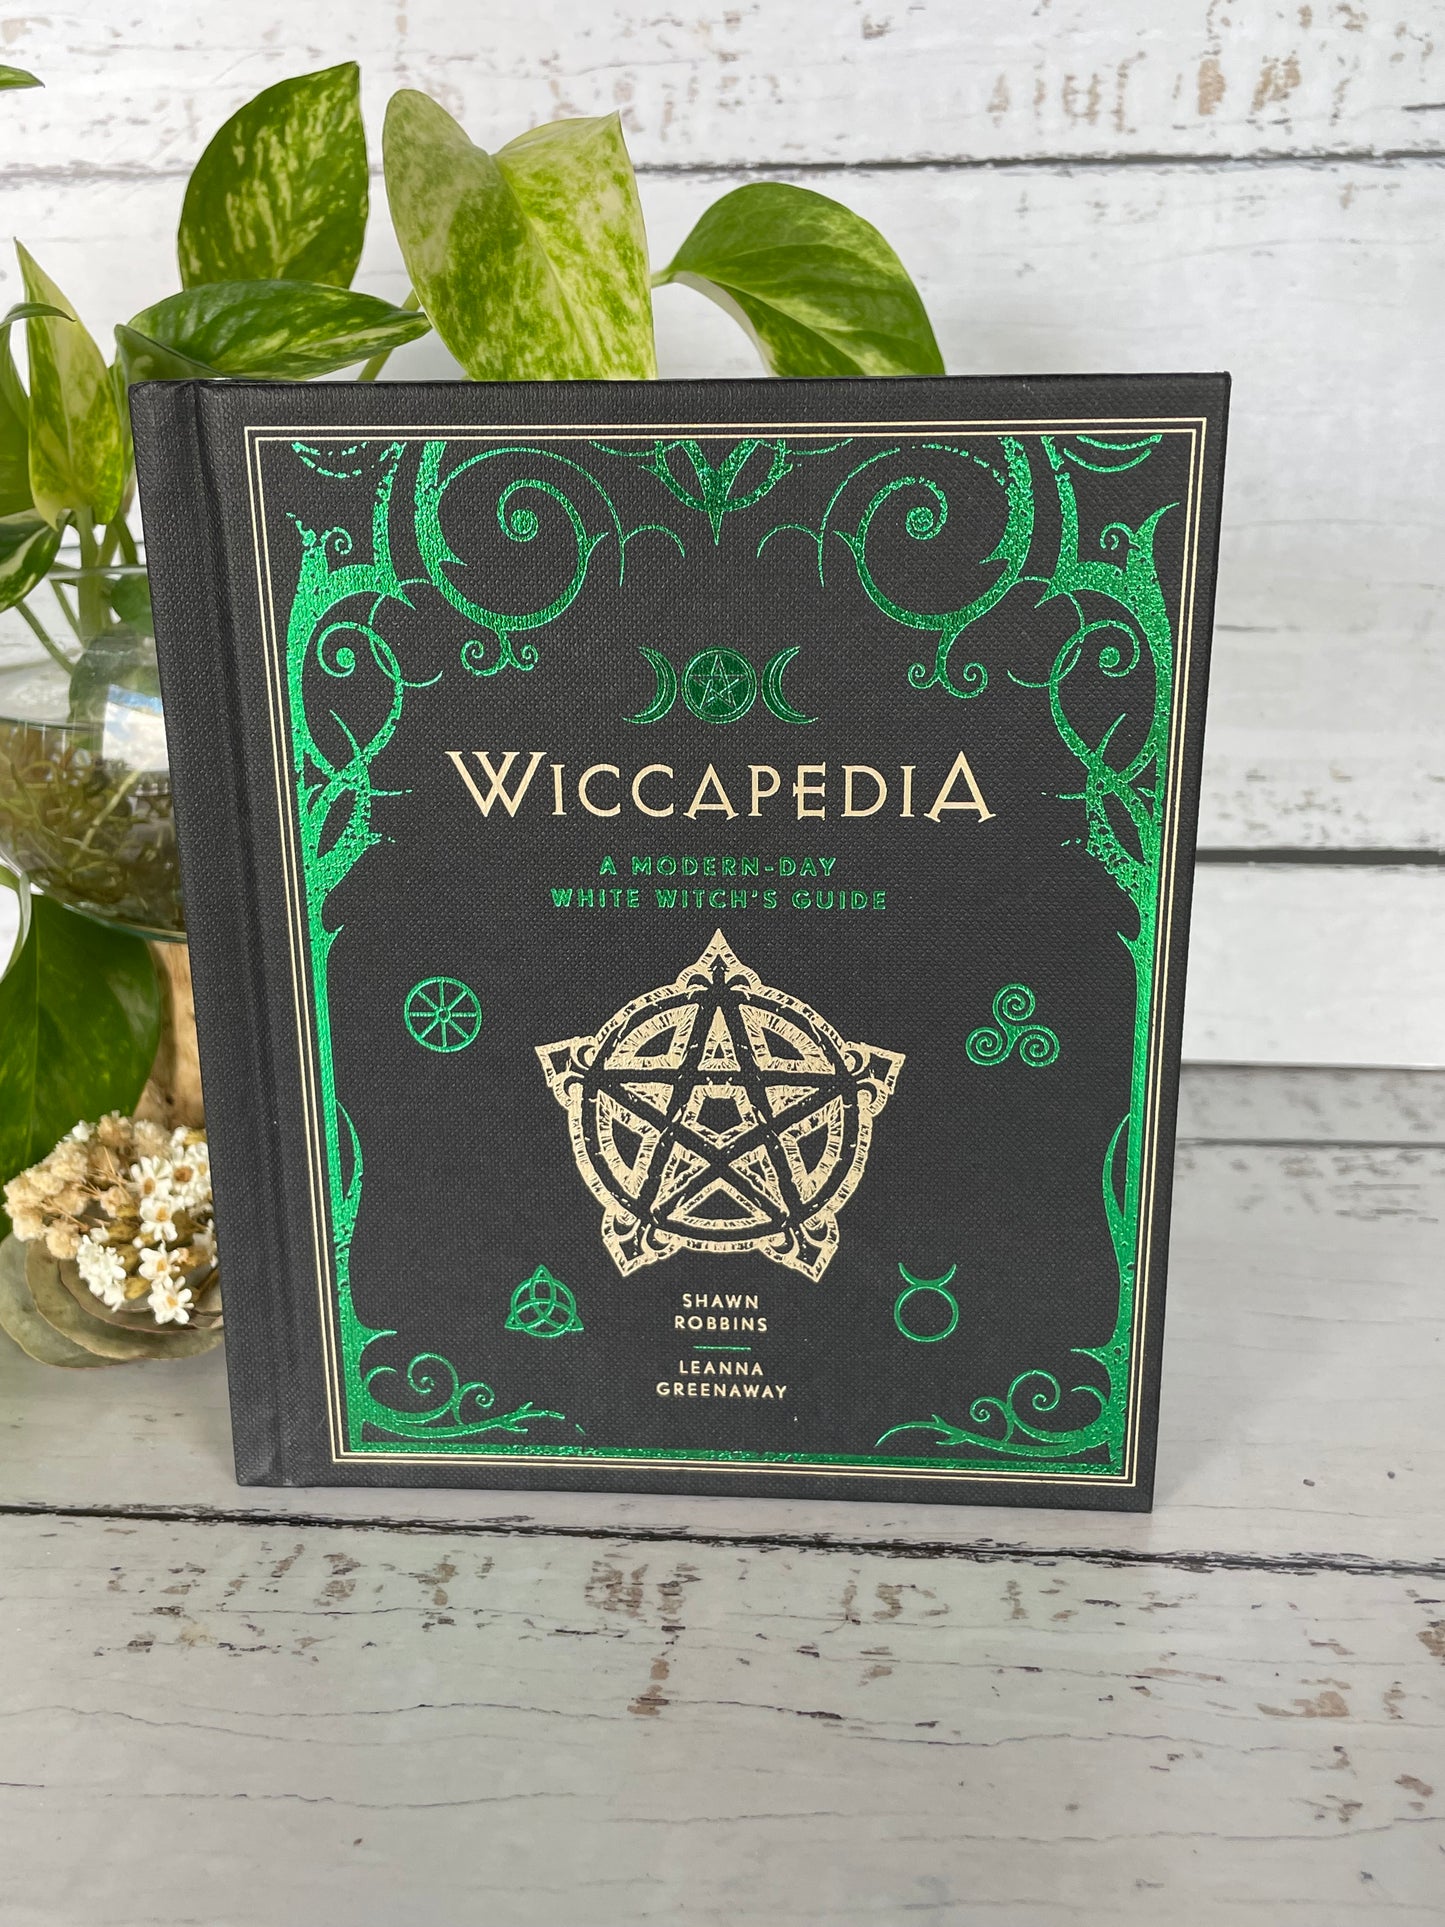 Wiccapedia ~ A Modern-Day White Witch's Guide